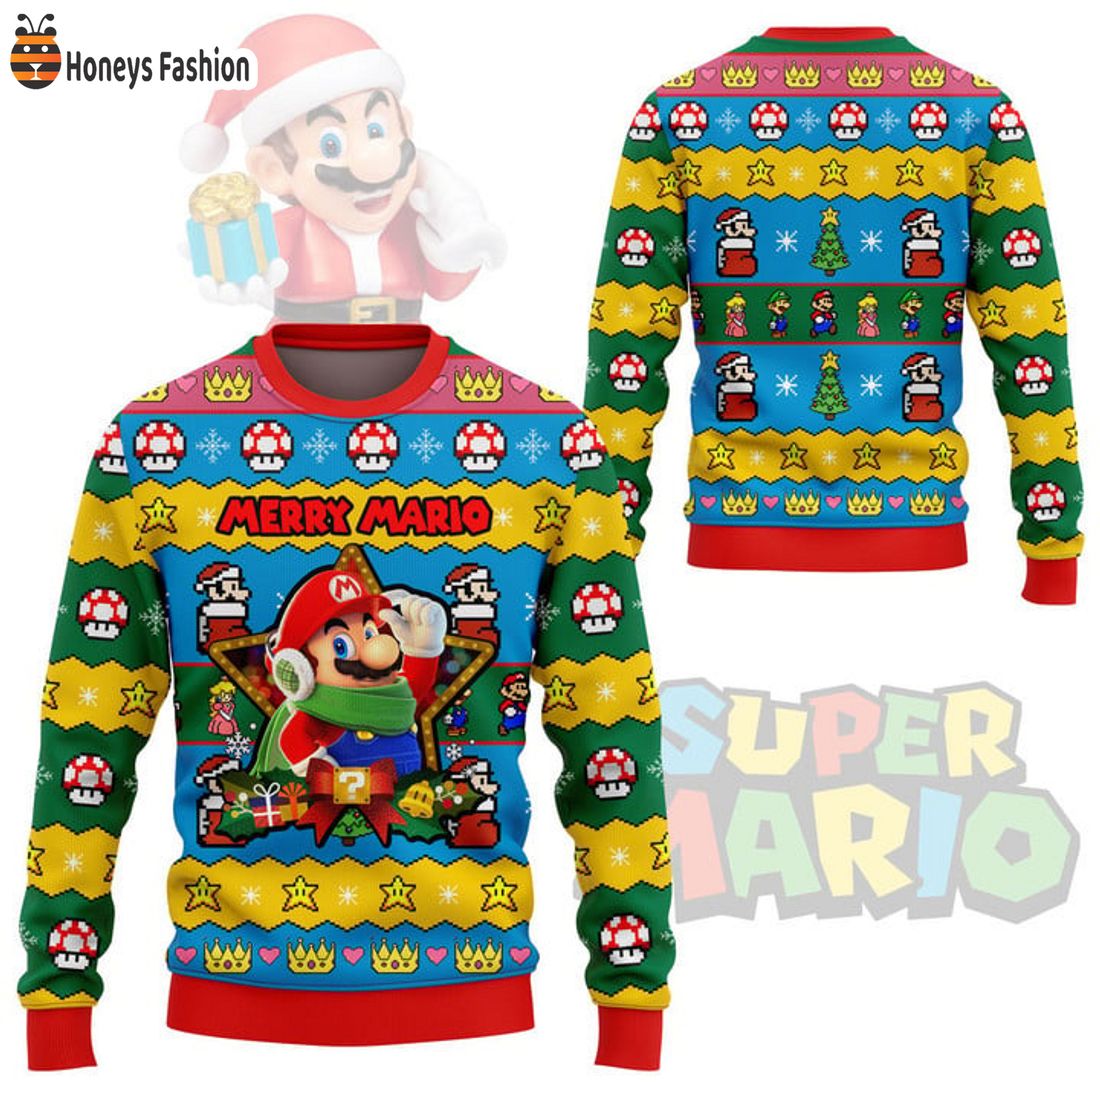 HOT Super Merry Mario Gift Ugly Christmas Sweater